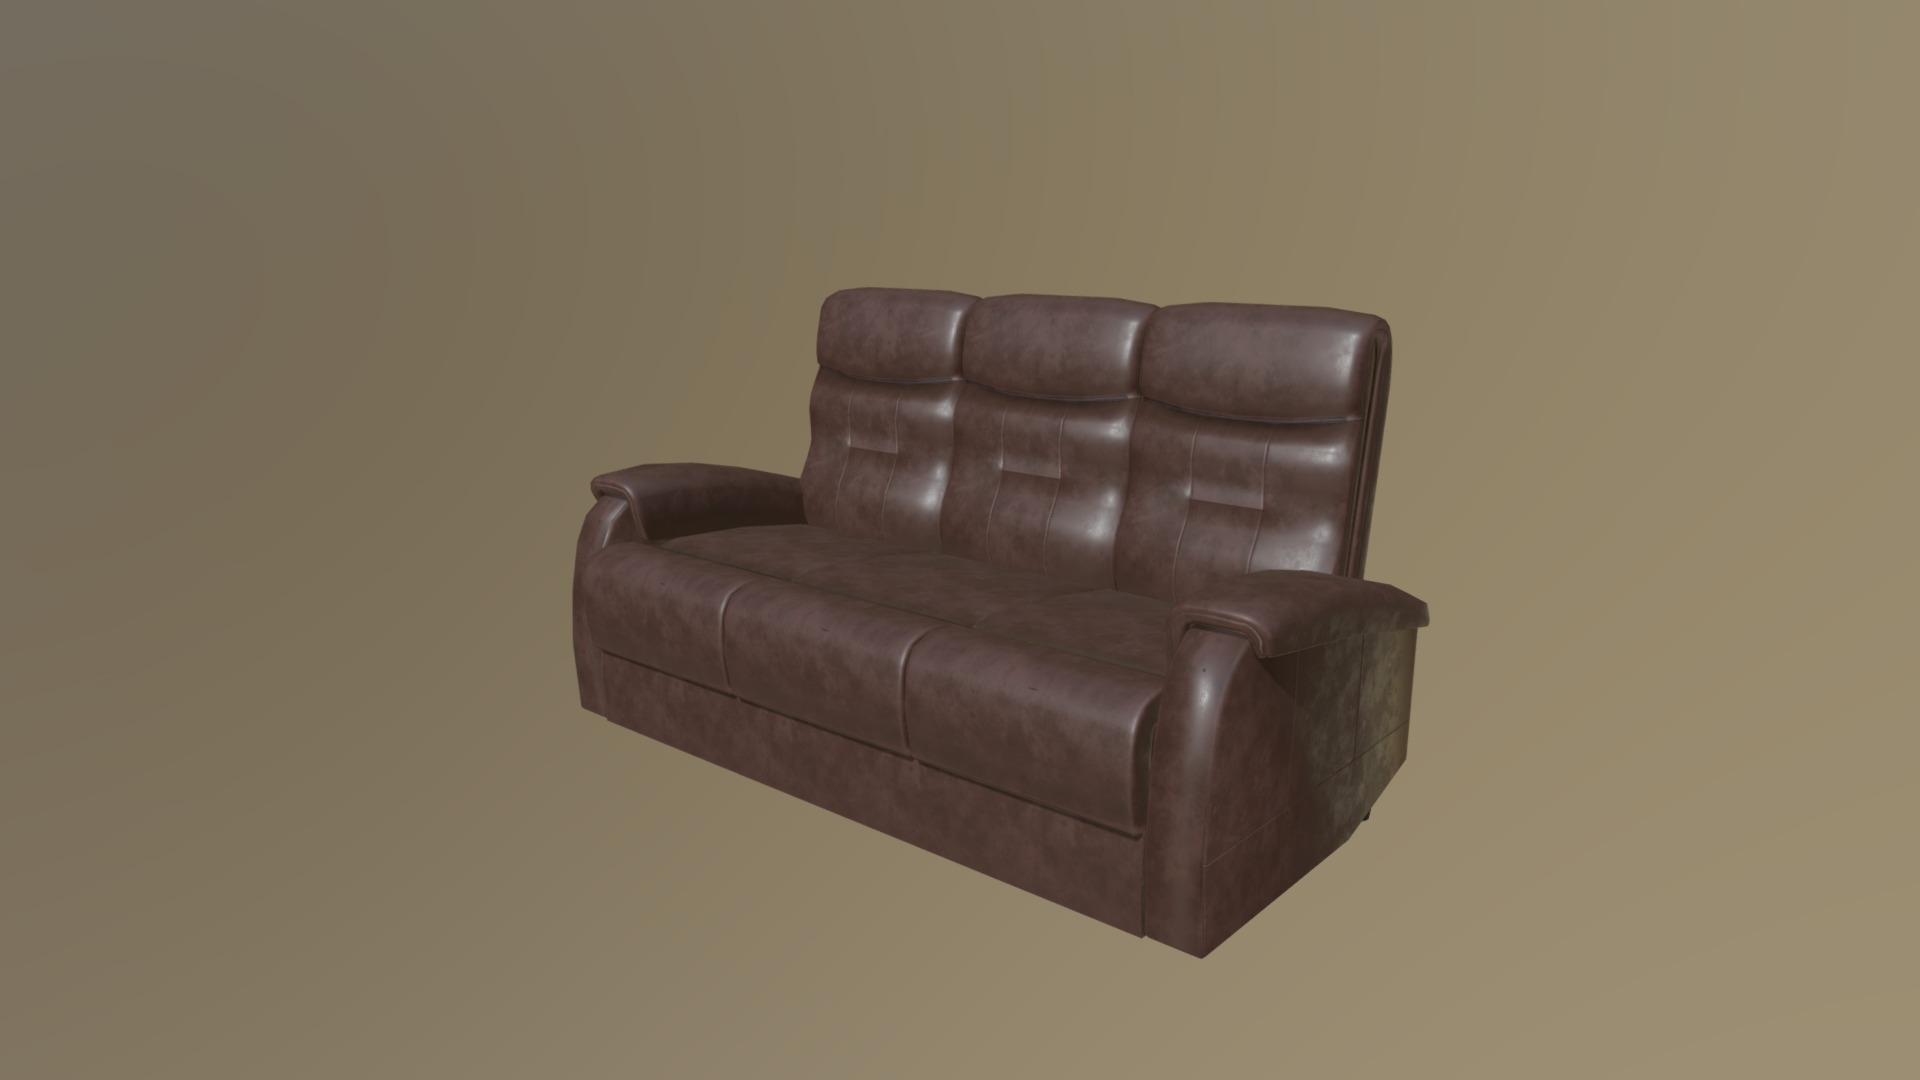 3D model Choco sofa - This is a 3D model of the Choco sofa. The 3D model is about a brown leather chair.